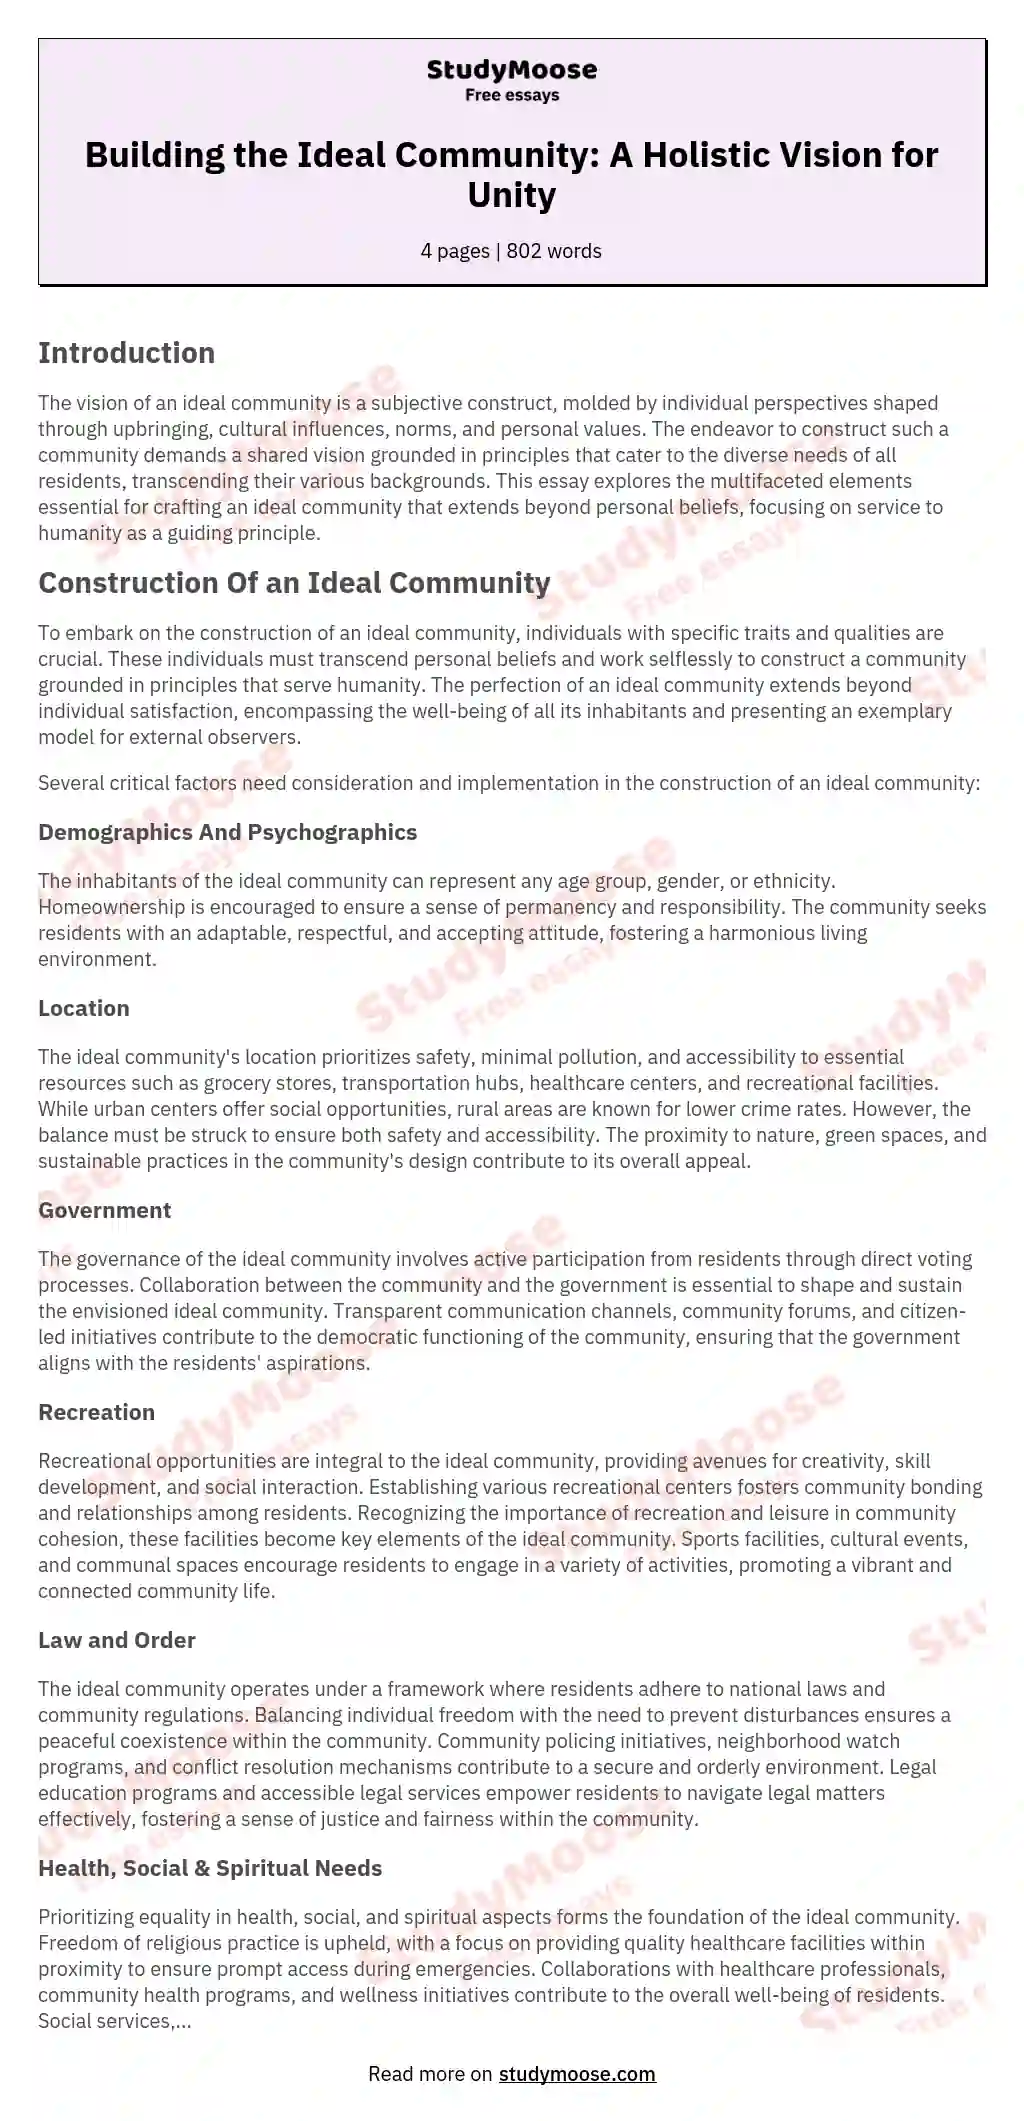 Building the Ideal Community: A Holistic Vision for Unity essay